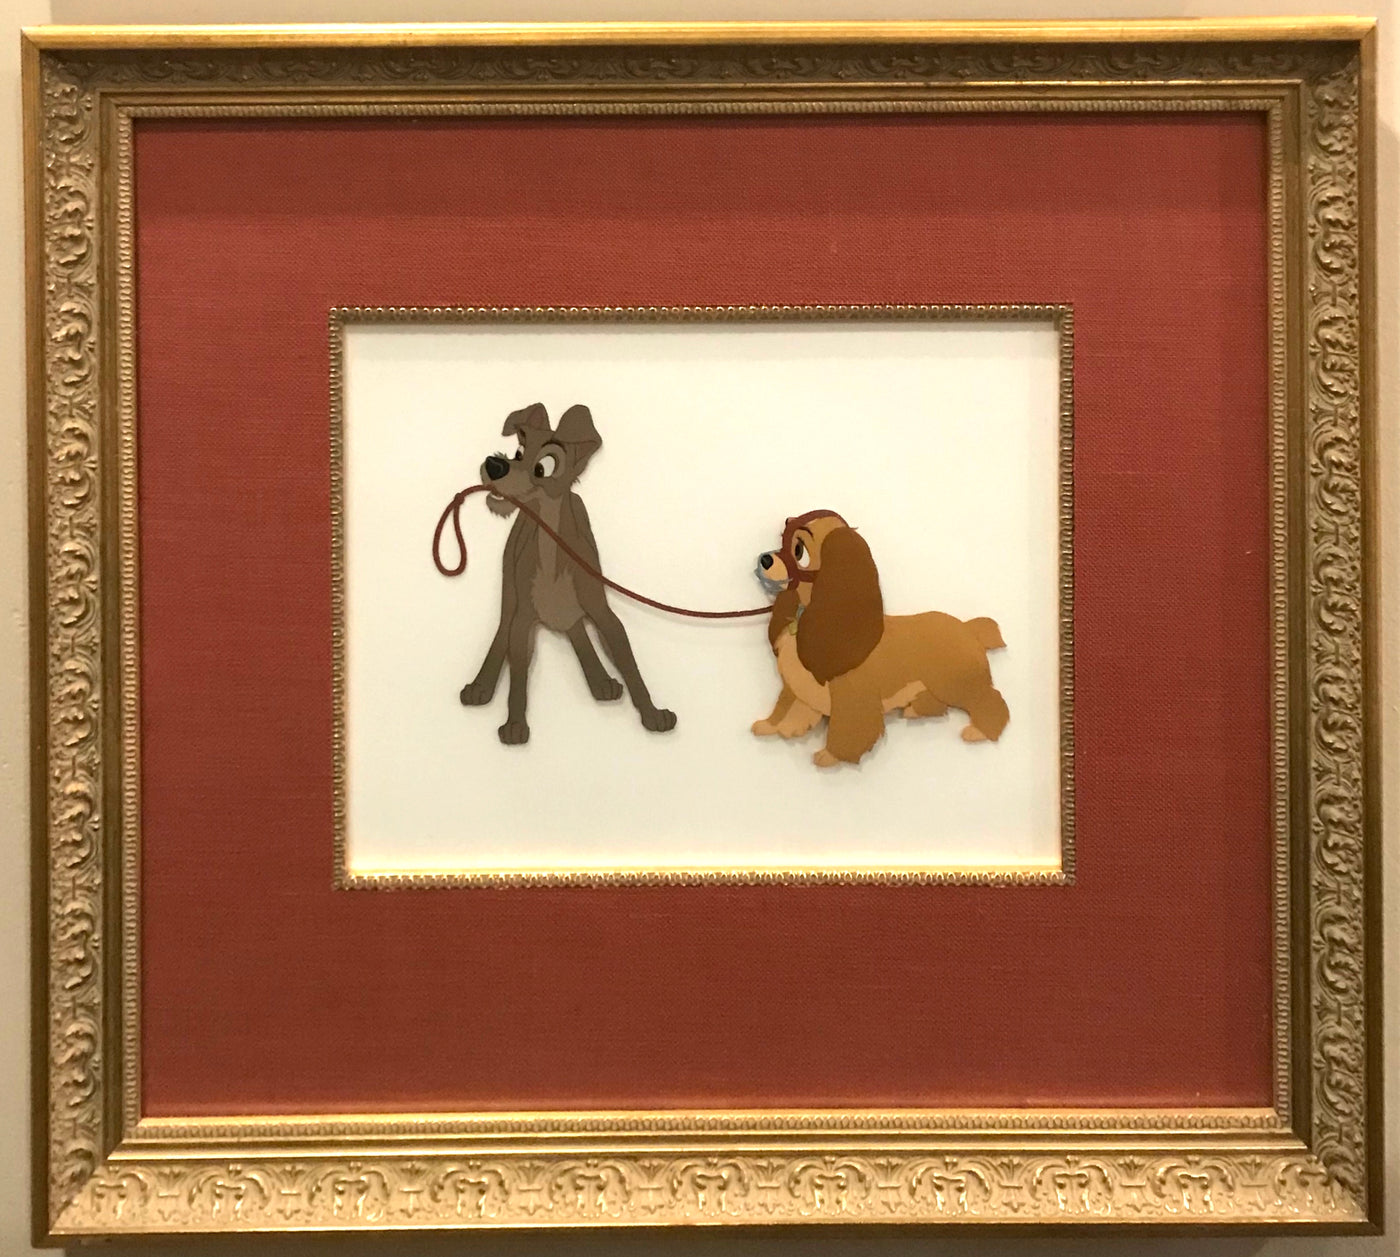 Original Walt Disney Production Cel from Lady and the Tramp featuring Tramp and Lady